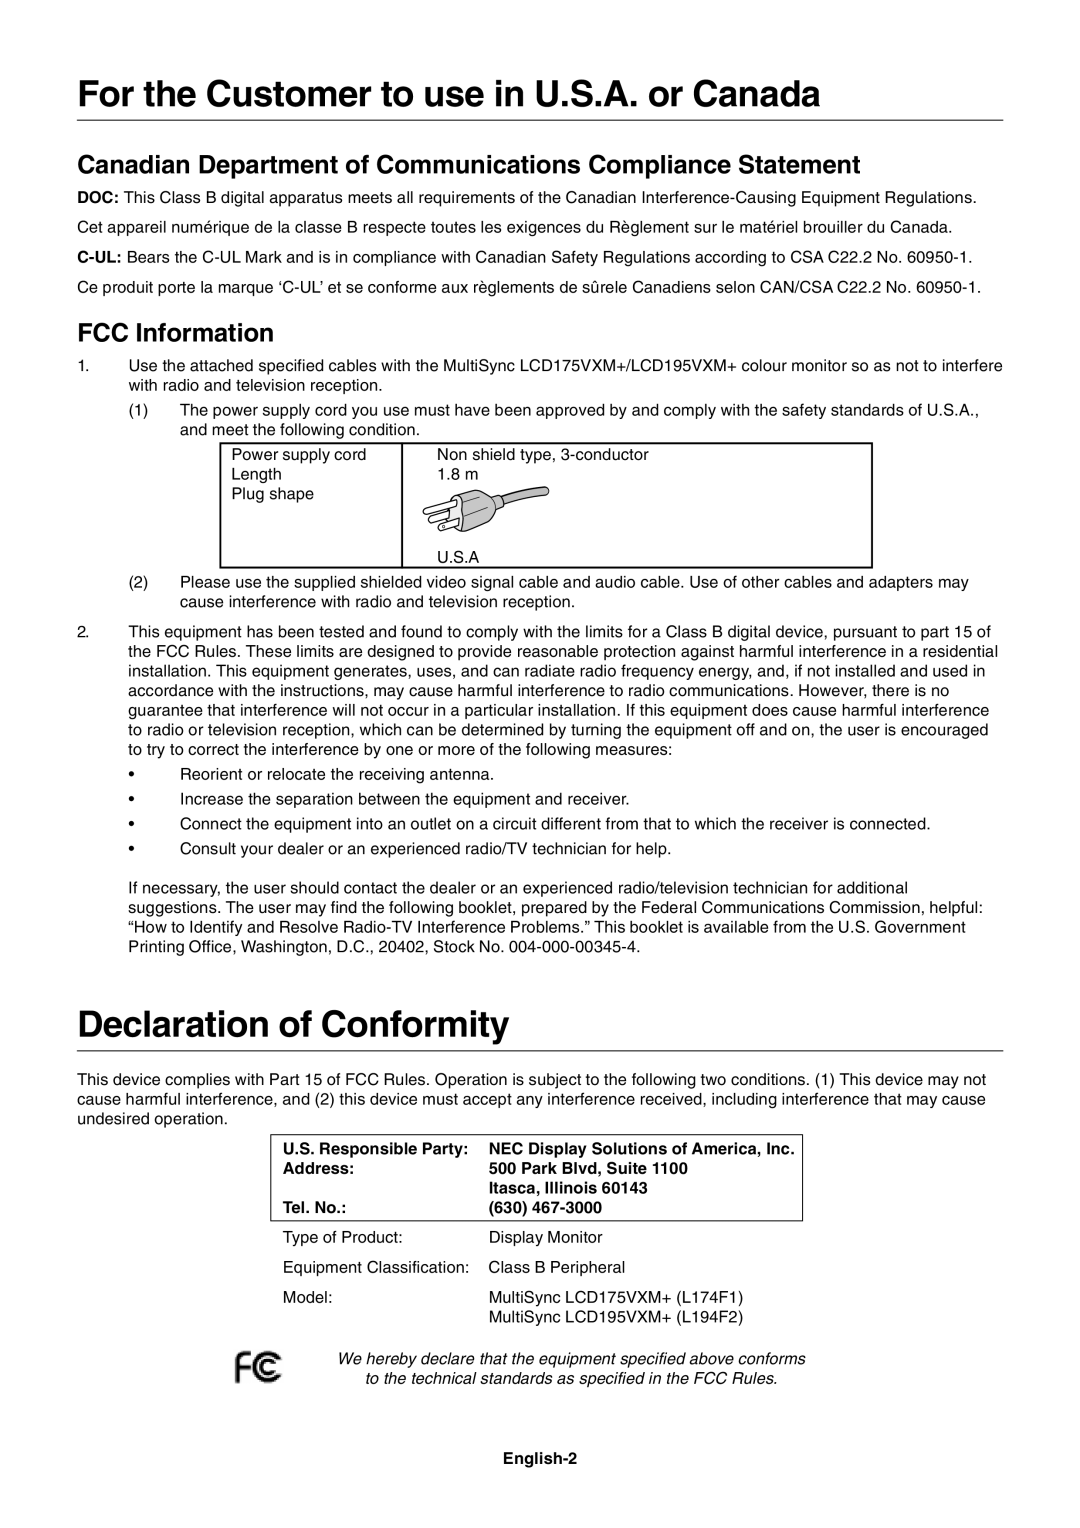 NEC LCD175VXM+ user manual For the Customer to use in U.S.A. or Canada, Declaration of Conformity, FCC Information 